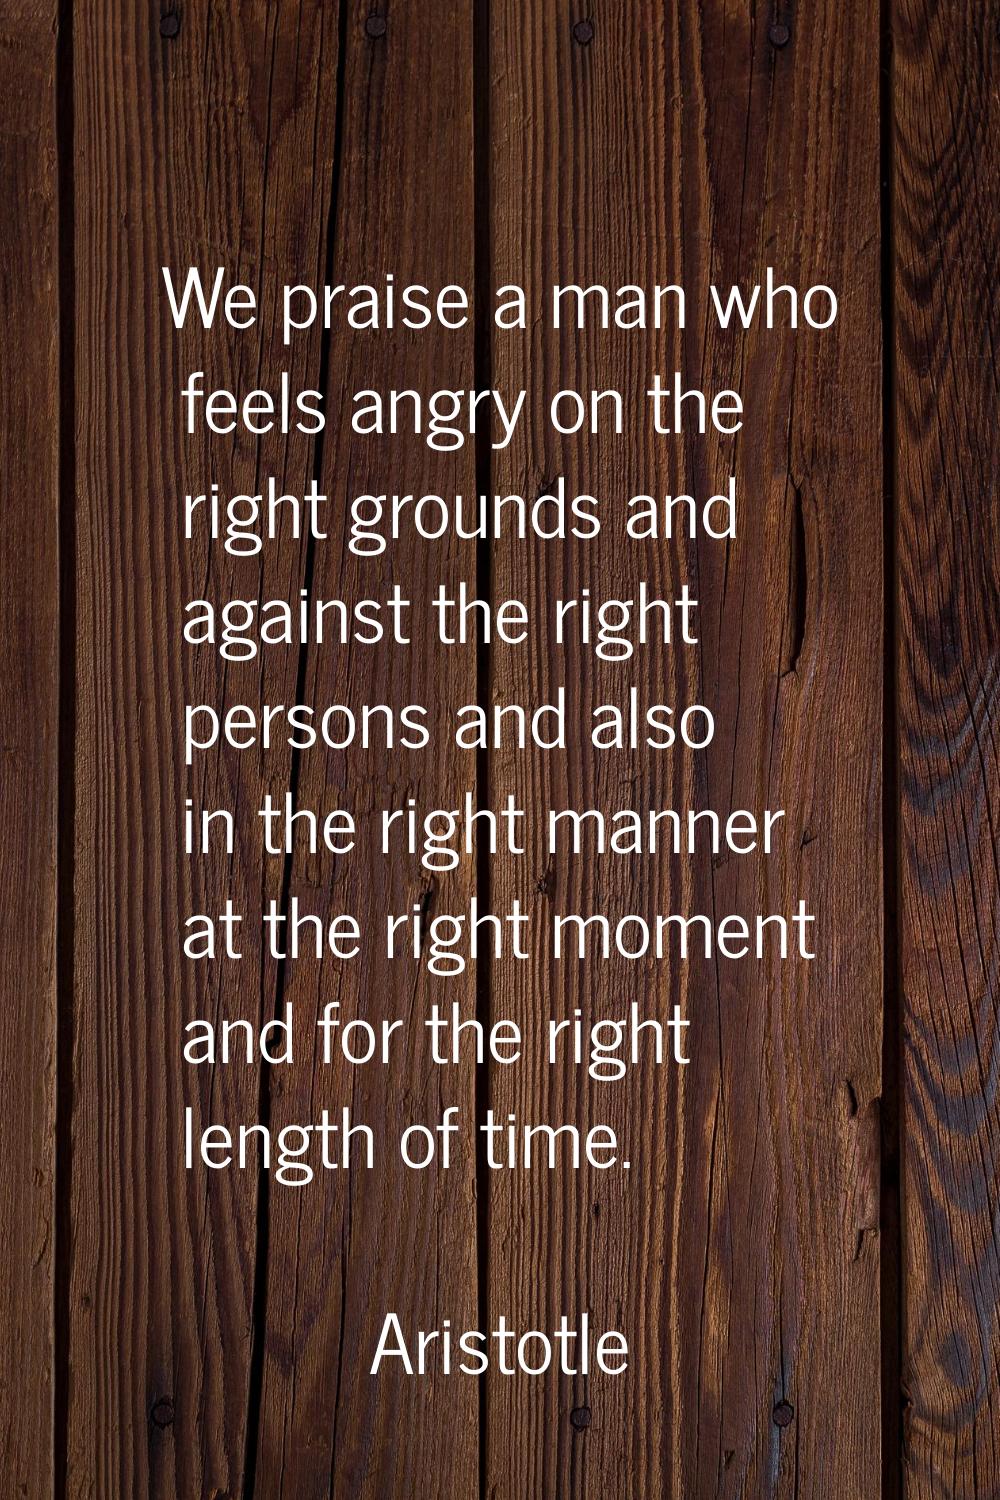 We praise a man who feels angry on the right grounds and against the right persons and also in the 